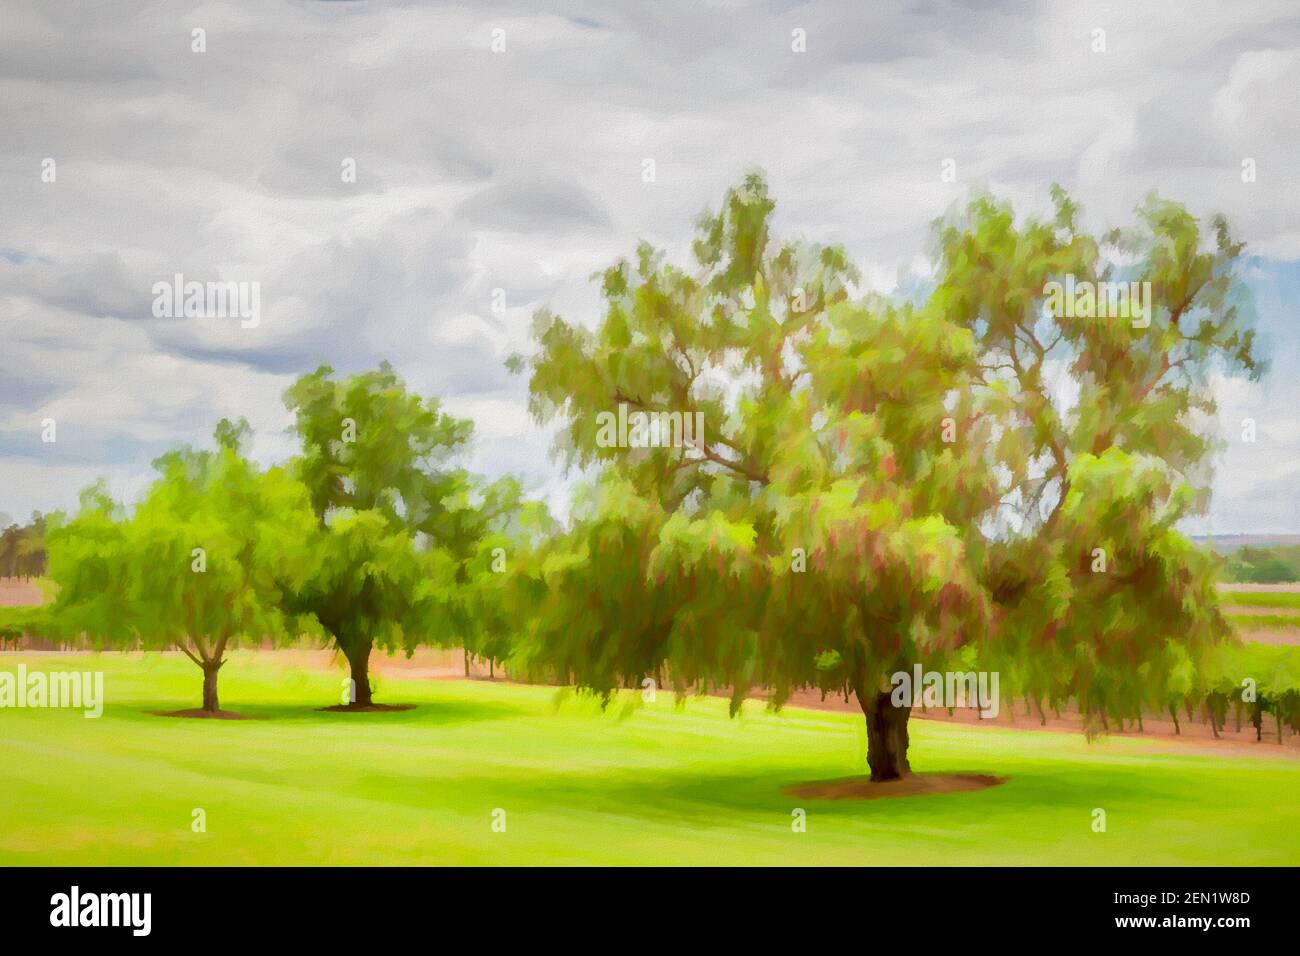 Digital painting of trees in a vineyard under a cloudy sky. Stock Photo